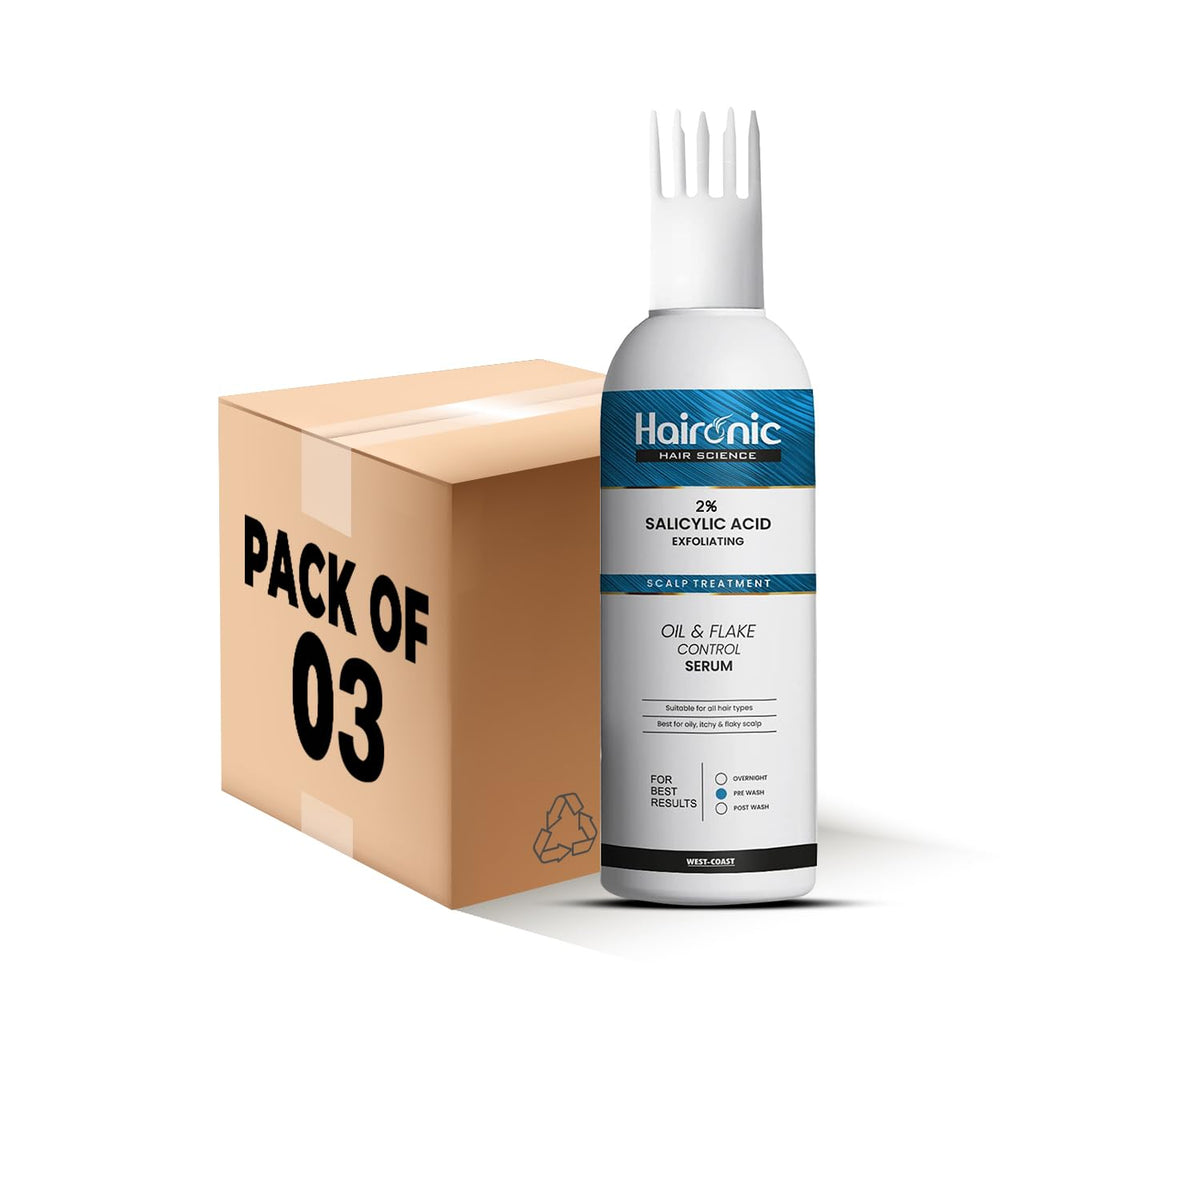 Haironic 2% Salicylic Acid Exfoliating Scalp Oil & Flake Control Hair Serum Best for Oily, Itchy & Flaky Scalp | Suitable for All Hair Types - 100ml (Pack of 3)